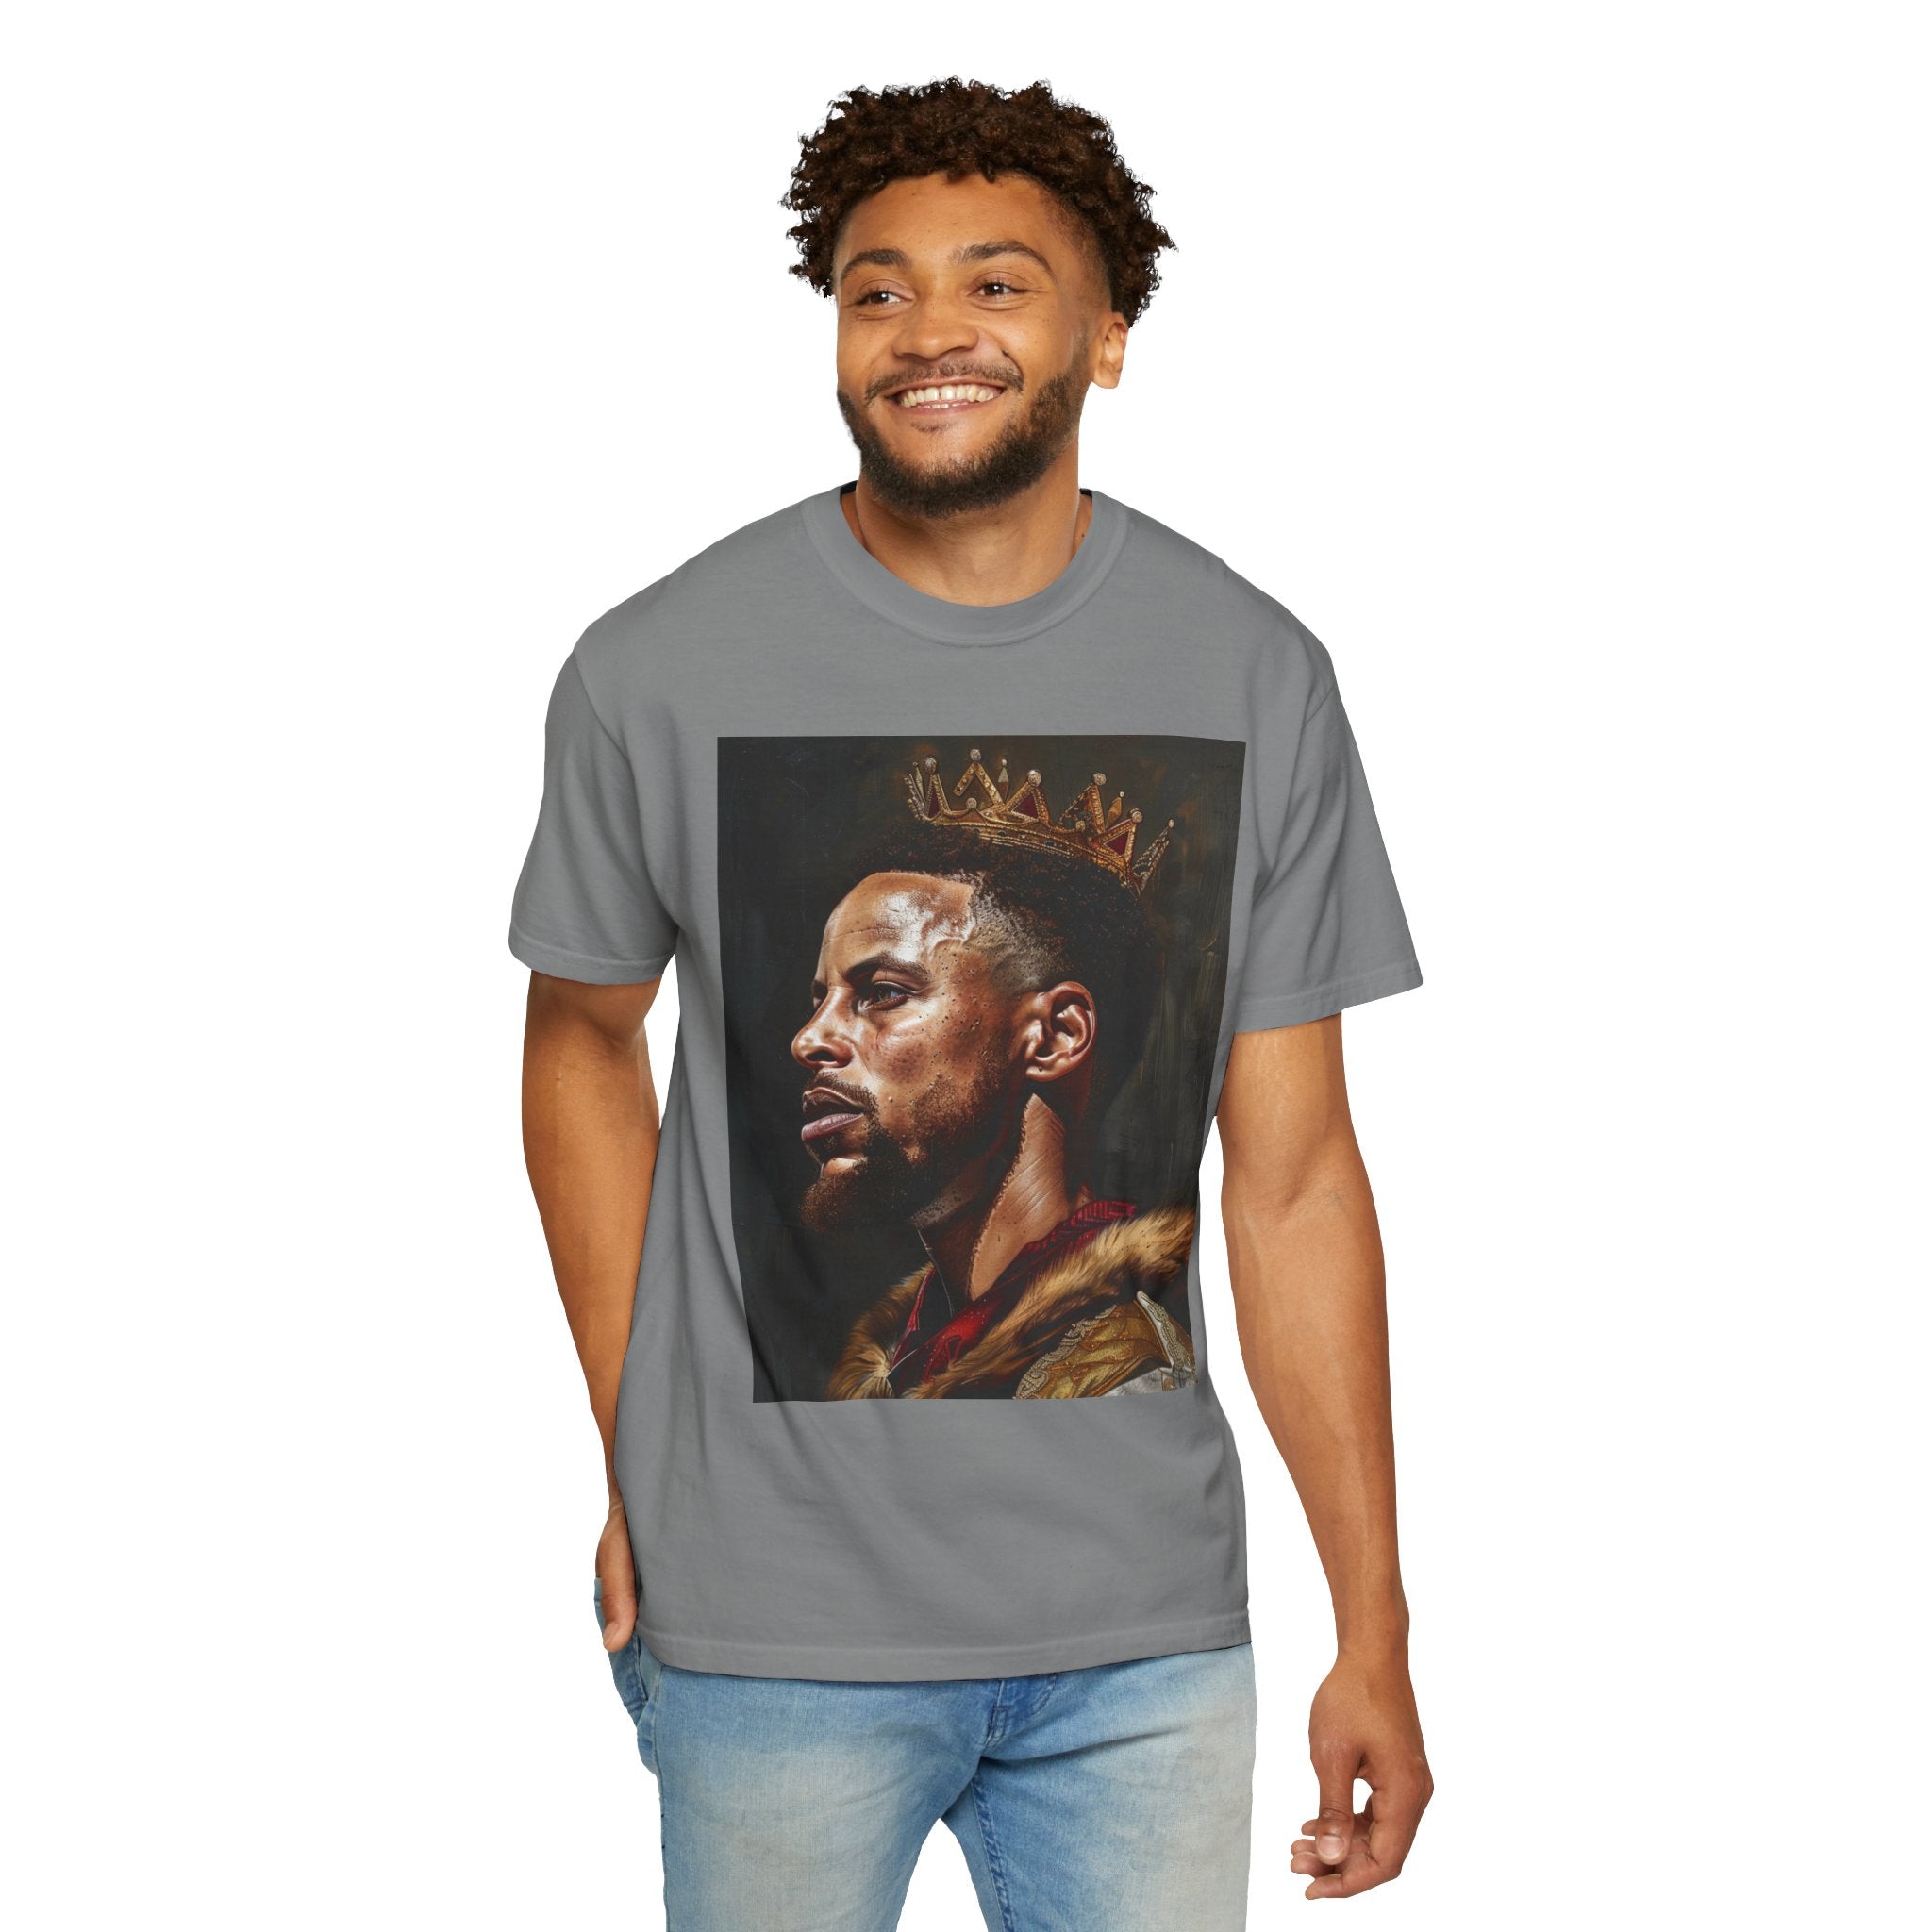 Court Classics: King Steph Renaissance Masterpiece Unisex Garment-Dyed T-Shirt - A Tribute to Basketball Royalty